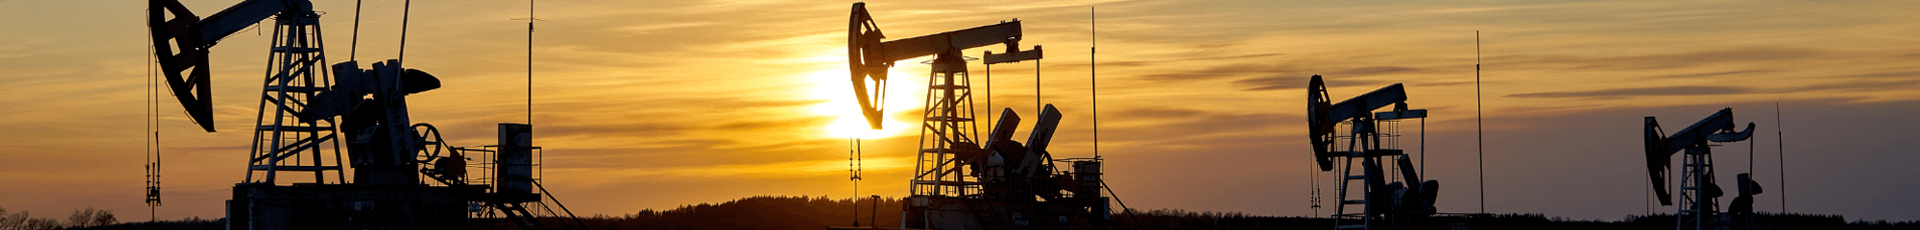 Remote Asset Monitoring and Secure IoT SCADA Communications for Oil and Gas